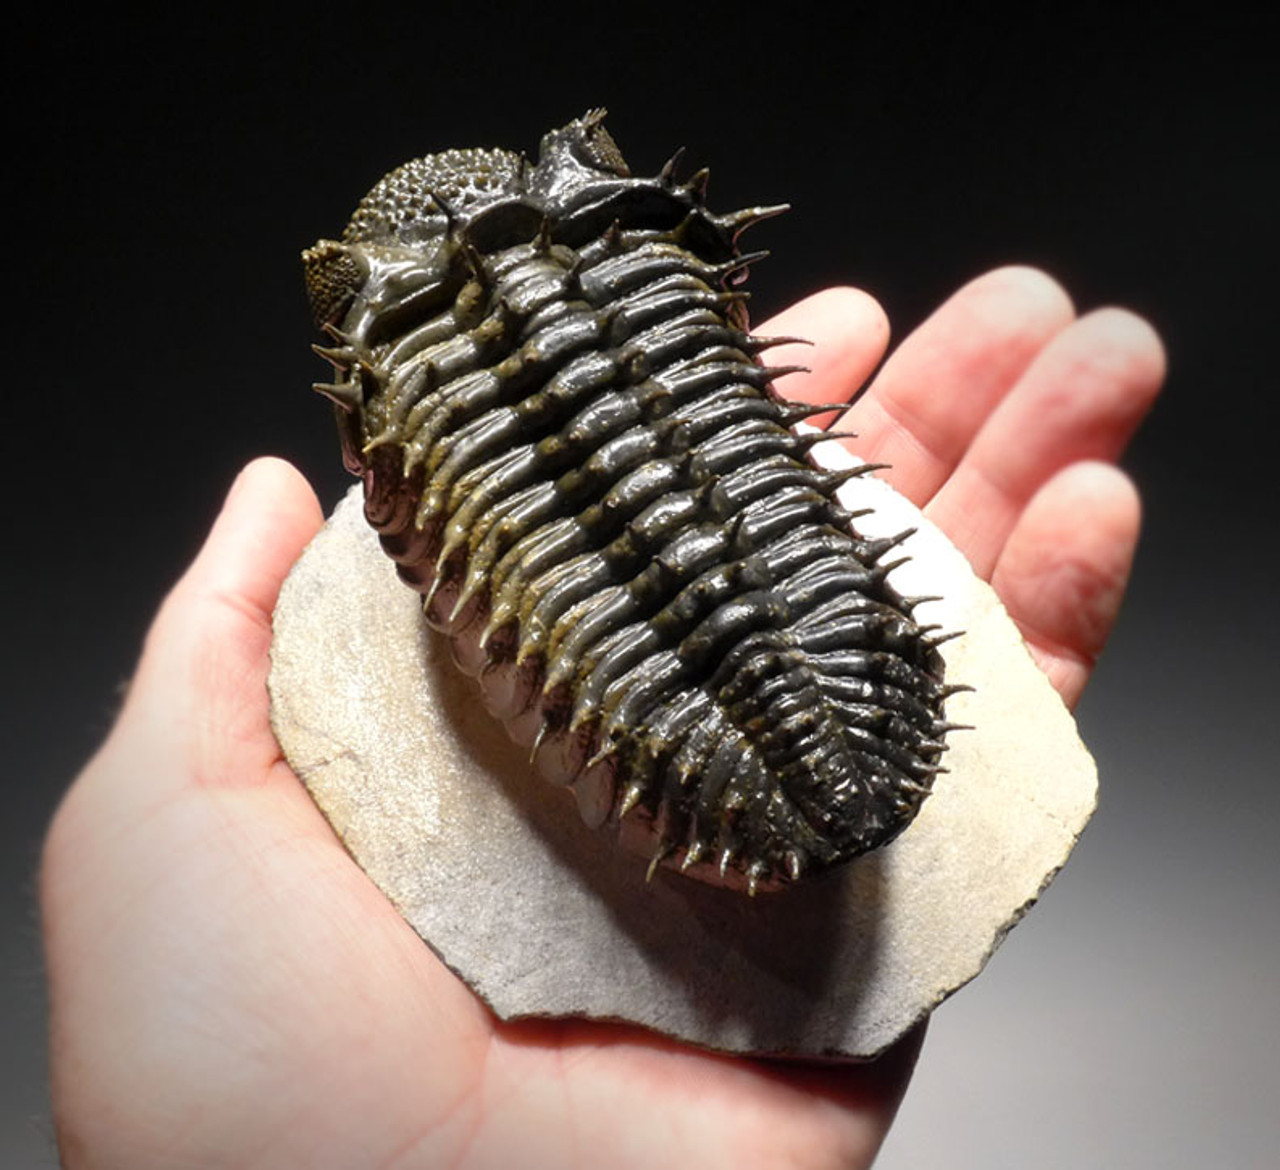 TRX323 - BI-COLORED FINEST GRADE GOLD AND BLACK SPINY DROTOPS ARMATUS TRILOBITE FOSSIL WITH FREE-STANDING SPINES